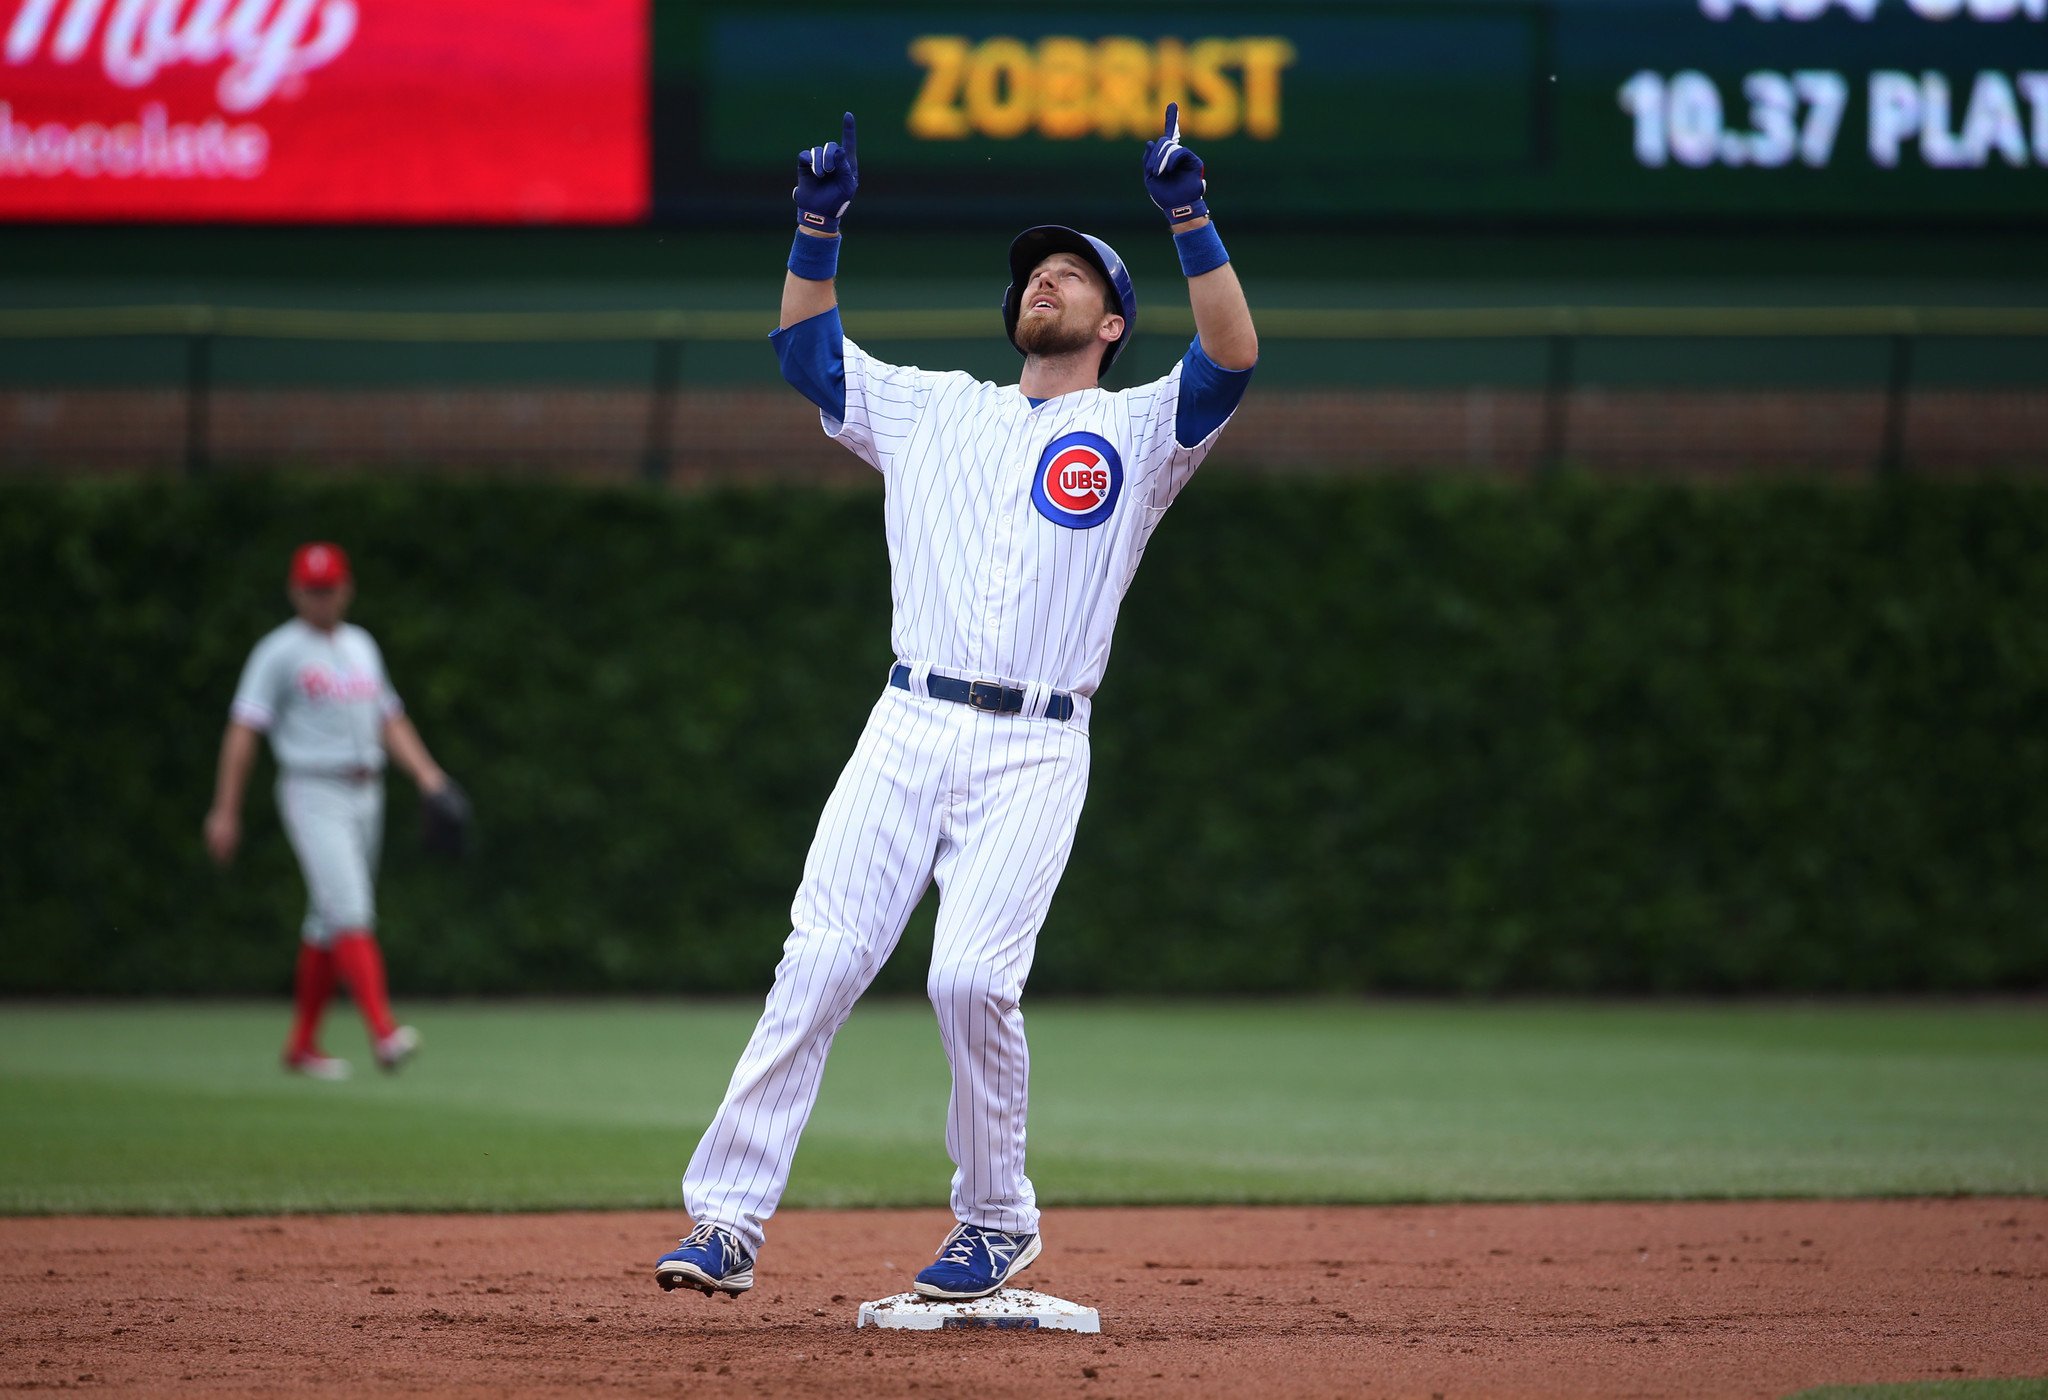 Happy Birthday to Ben Zobrist who turns 36 today! 